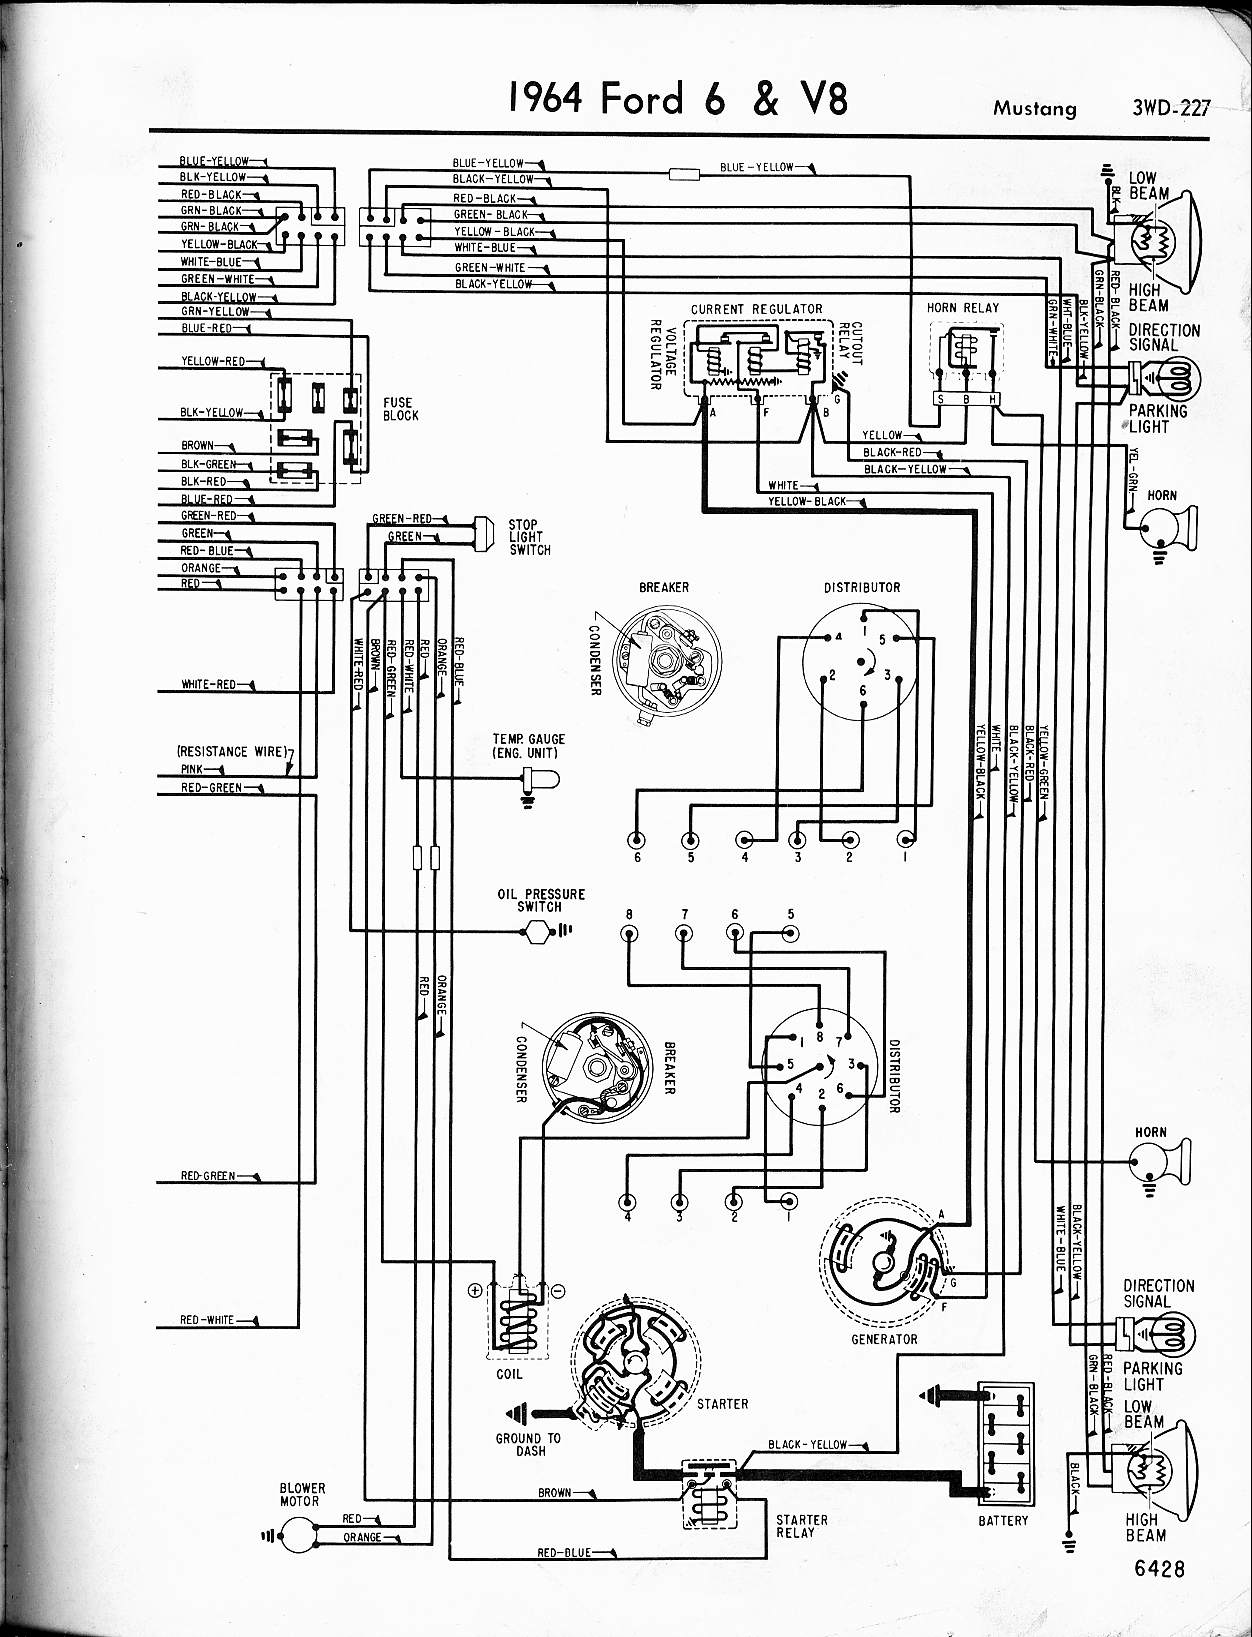 57-65 Ford Wiring Diagrams  1964 Ford Galaxie 500 Wiring Diagram    The Old Car Manual Project